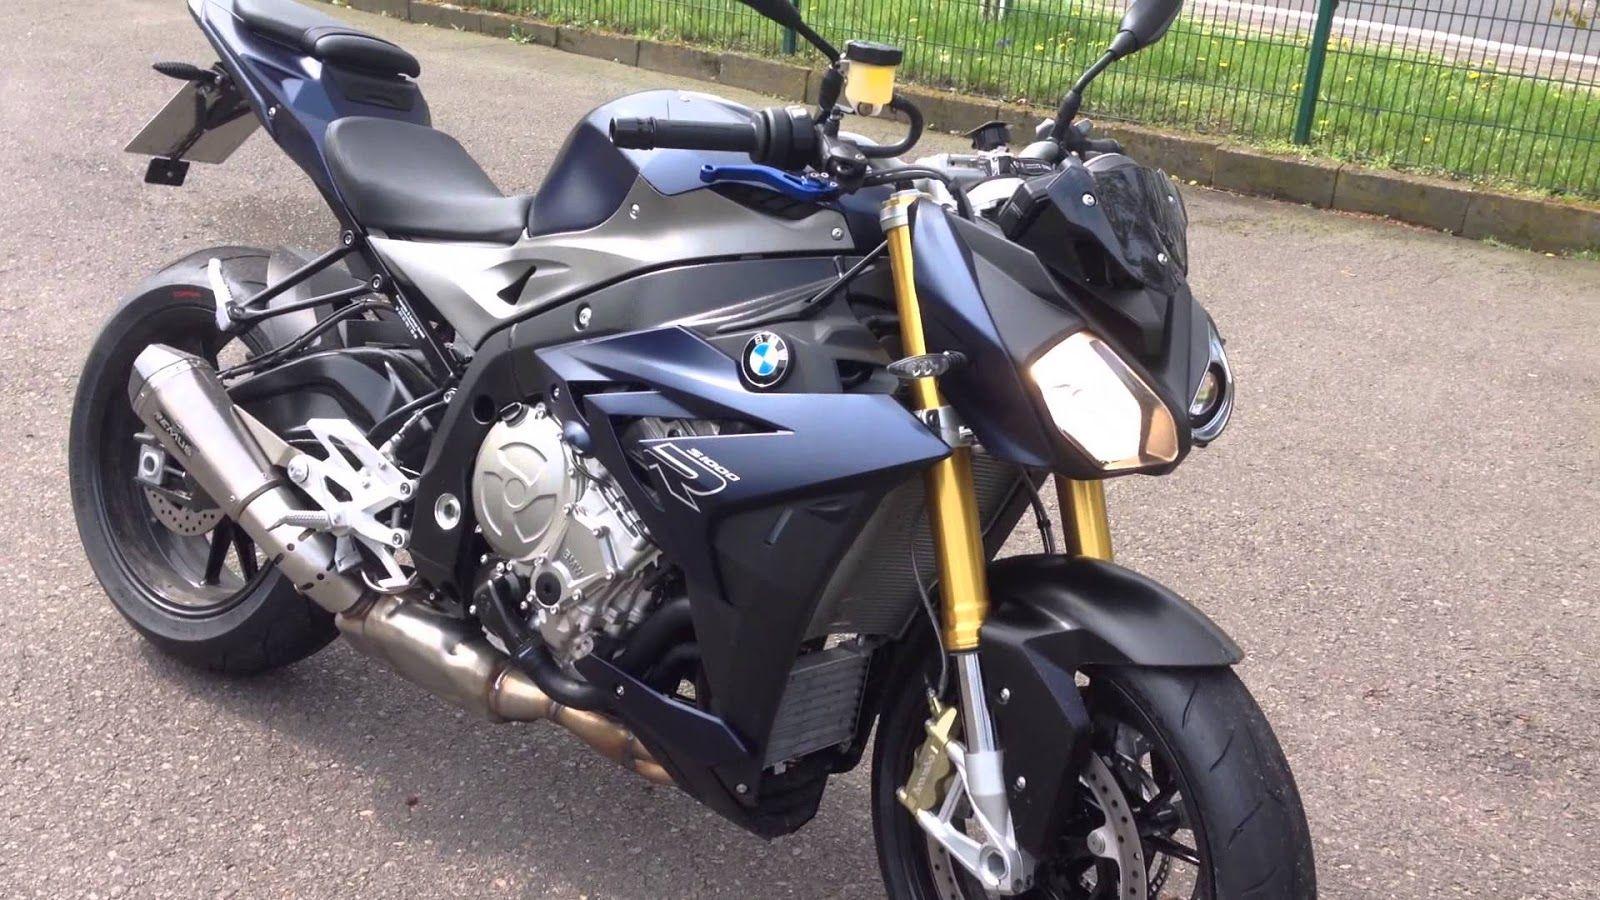 Best of 25 BMW S 1000 R HD Image Collection Latest New & Old